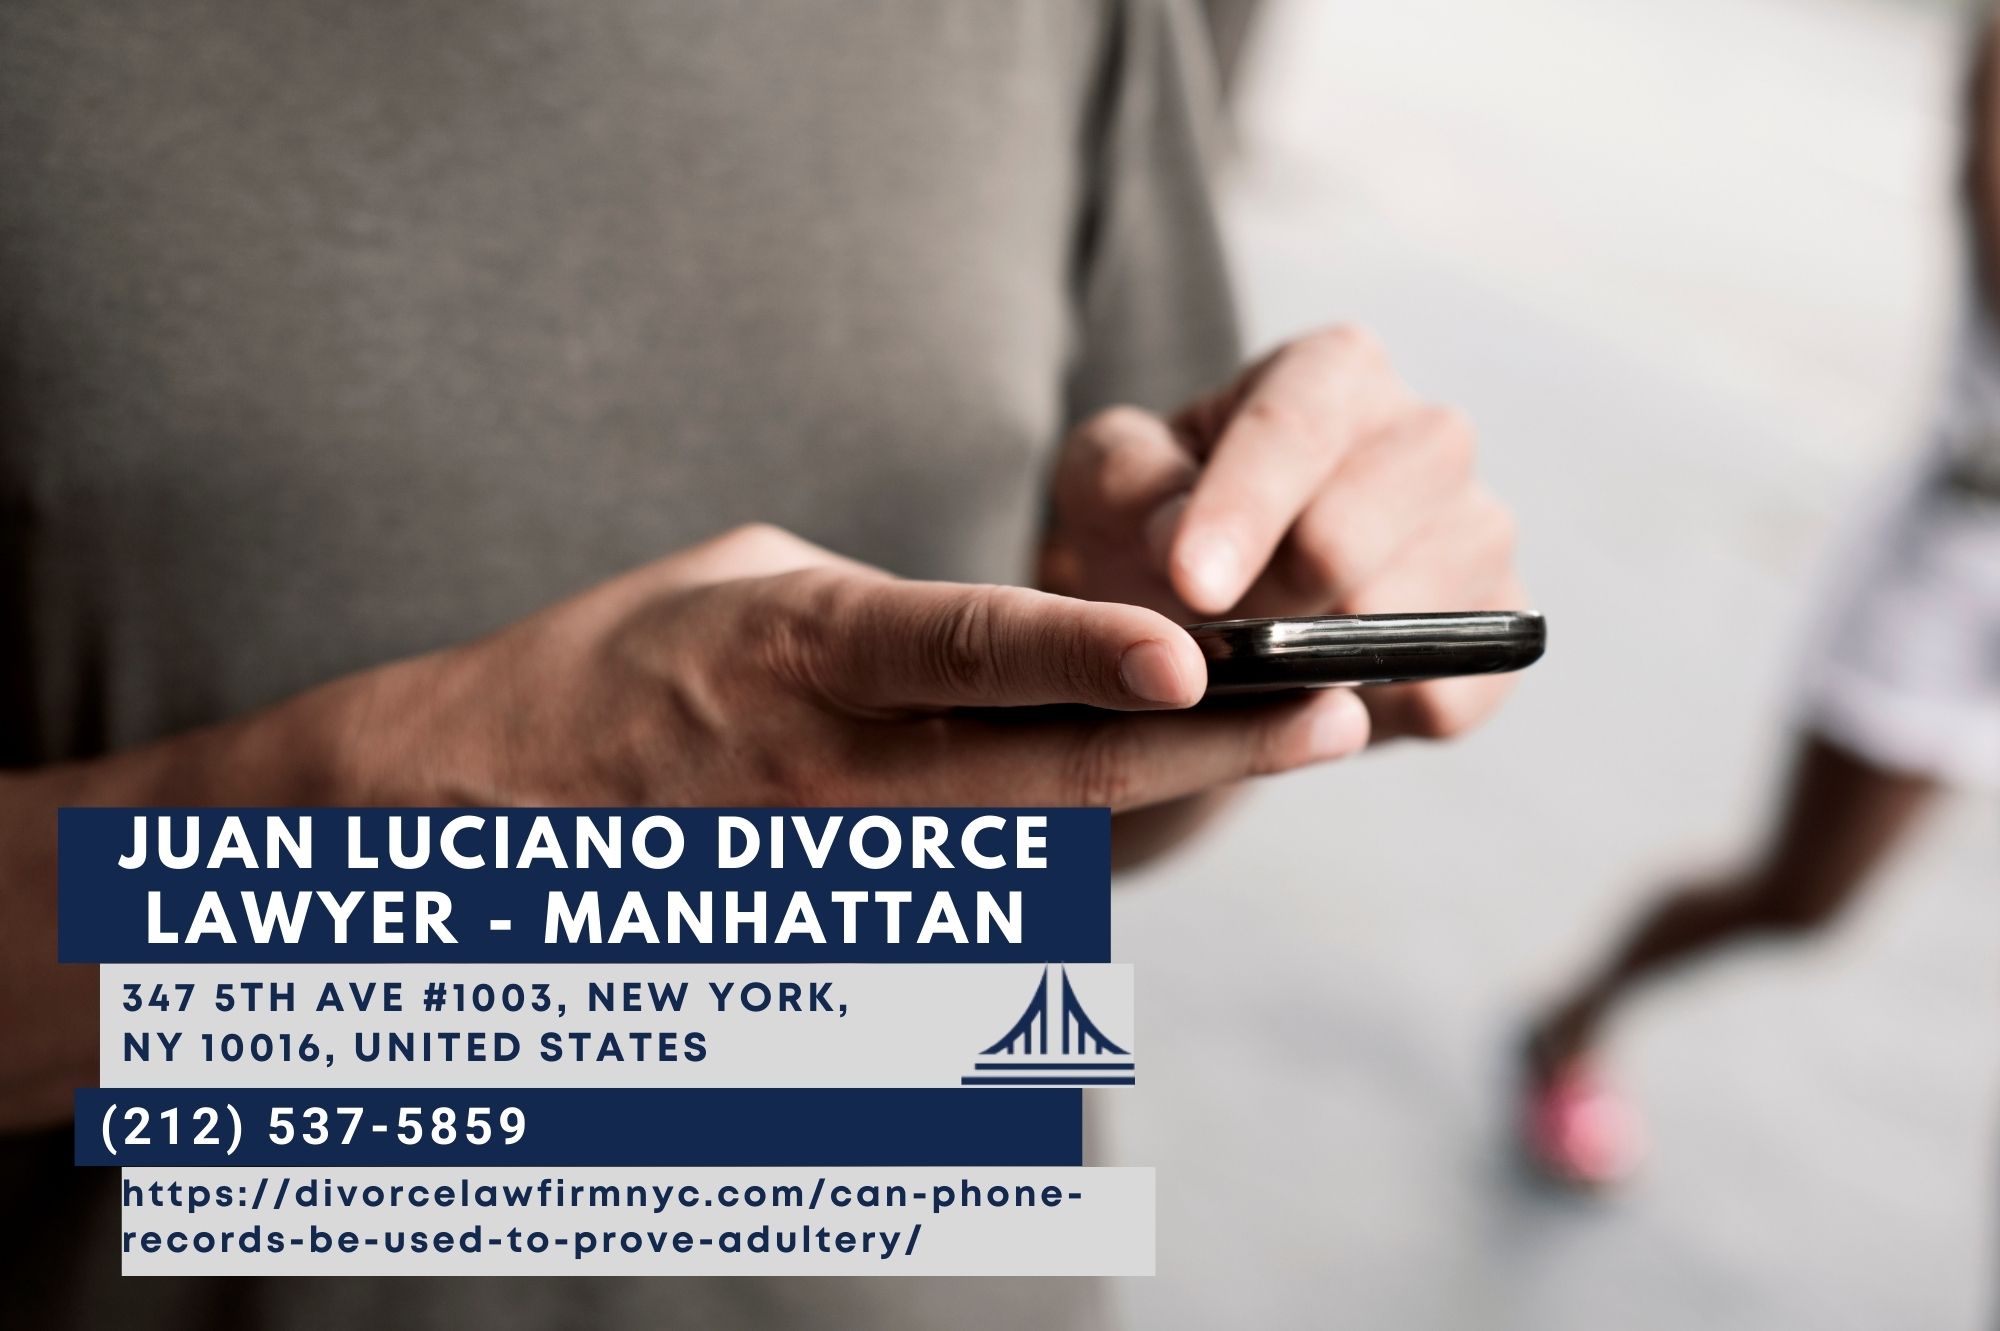 New York Divorce Lawyer Juan Luciano Sheds Light on the Role of Phone Records in Proving Adultery